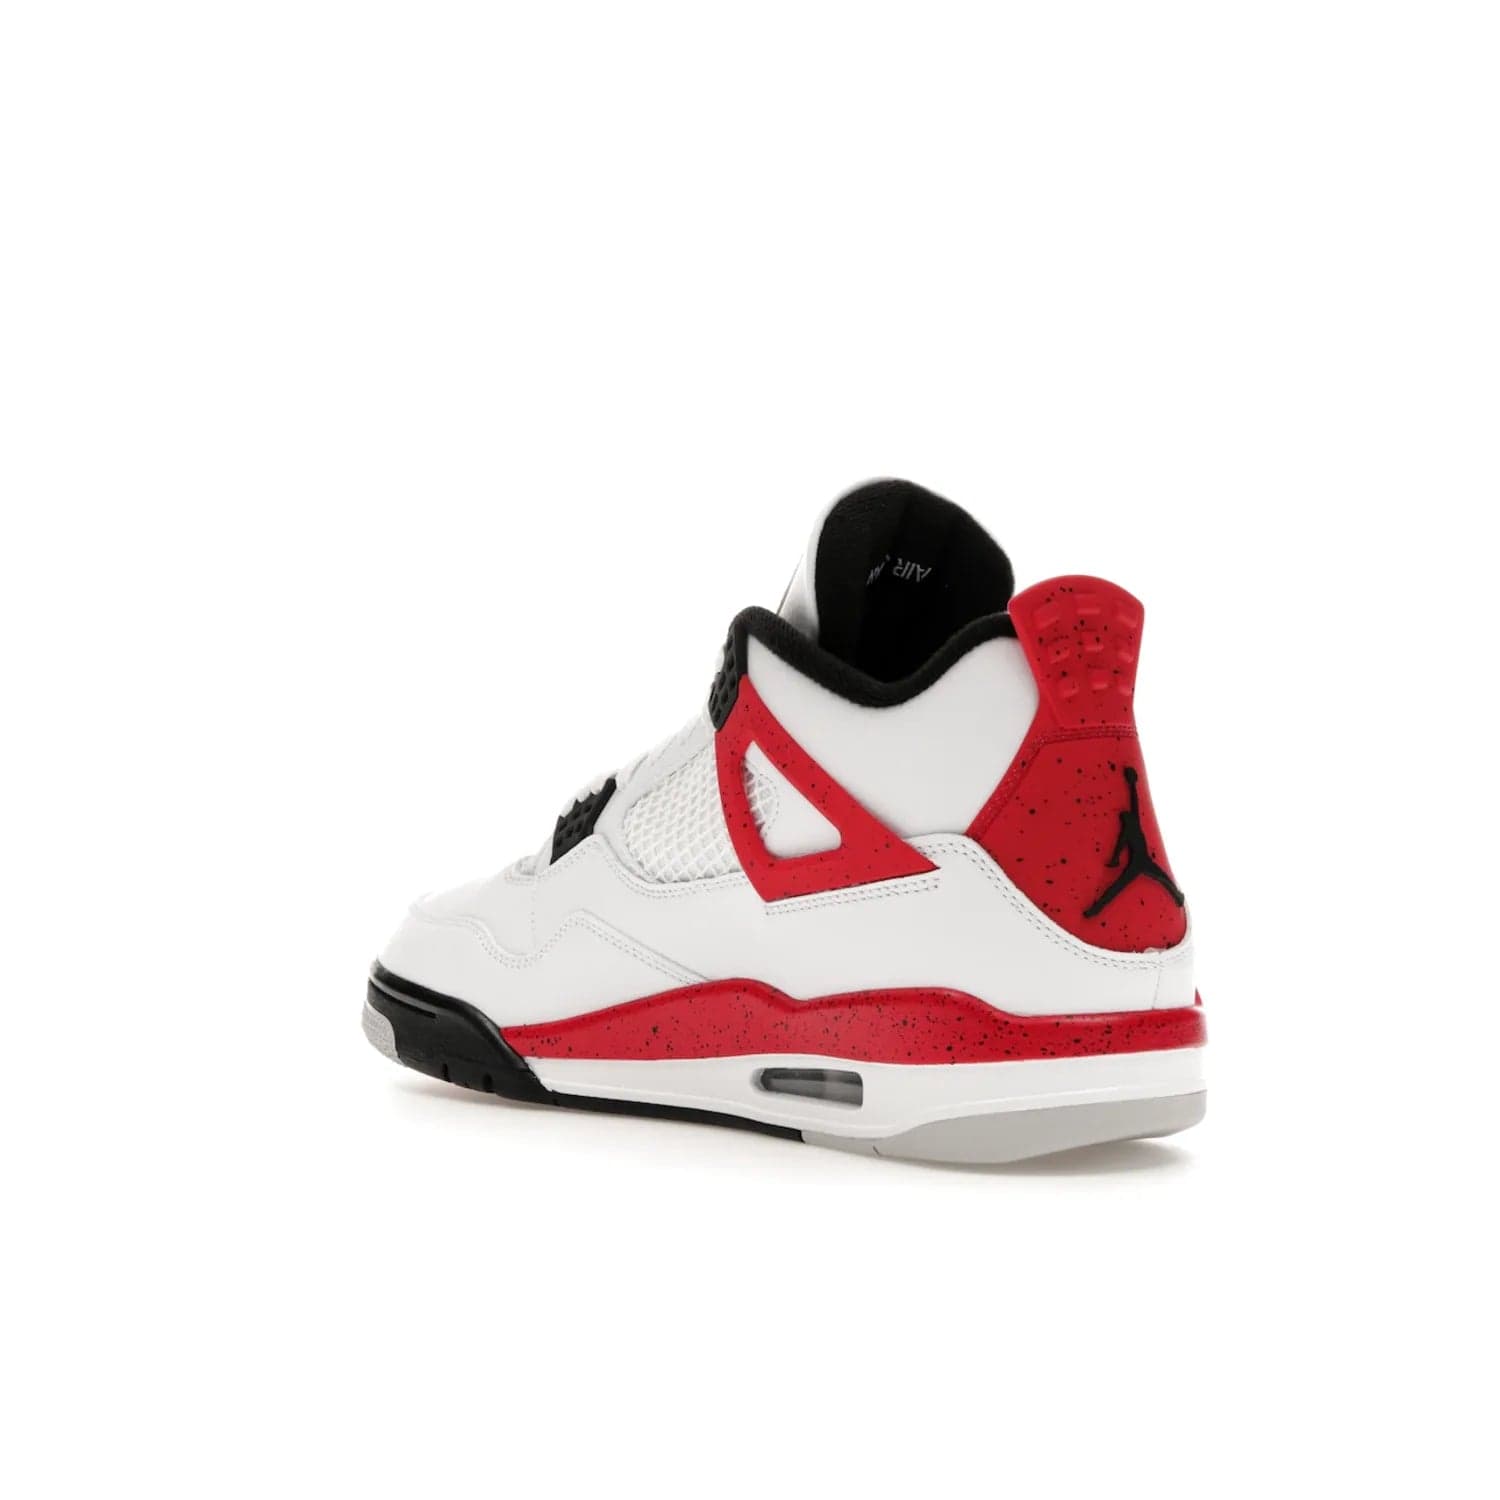 Jordan 4 Retro Red Cement - Image 24 - Only at www.BallersClubKickz.com - Iconic Jordan silhouette with a unique twist. White premium leather uppers with fire red and black detailing. Black, white, and fire red midsole with mesh detailing and Jumpman logo. Jordan 4 Retro Red Cement released with premium price.